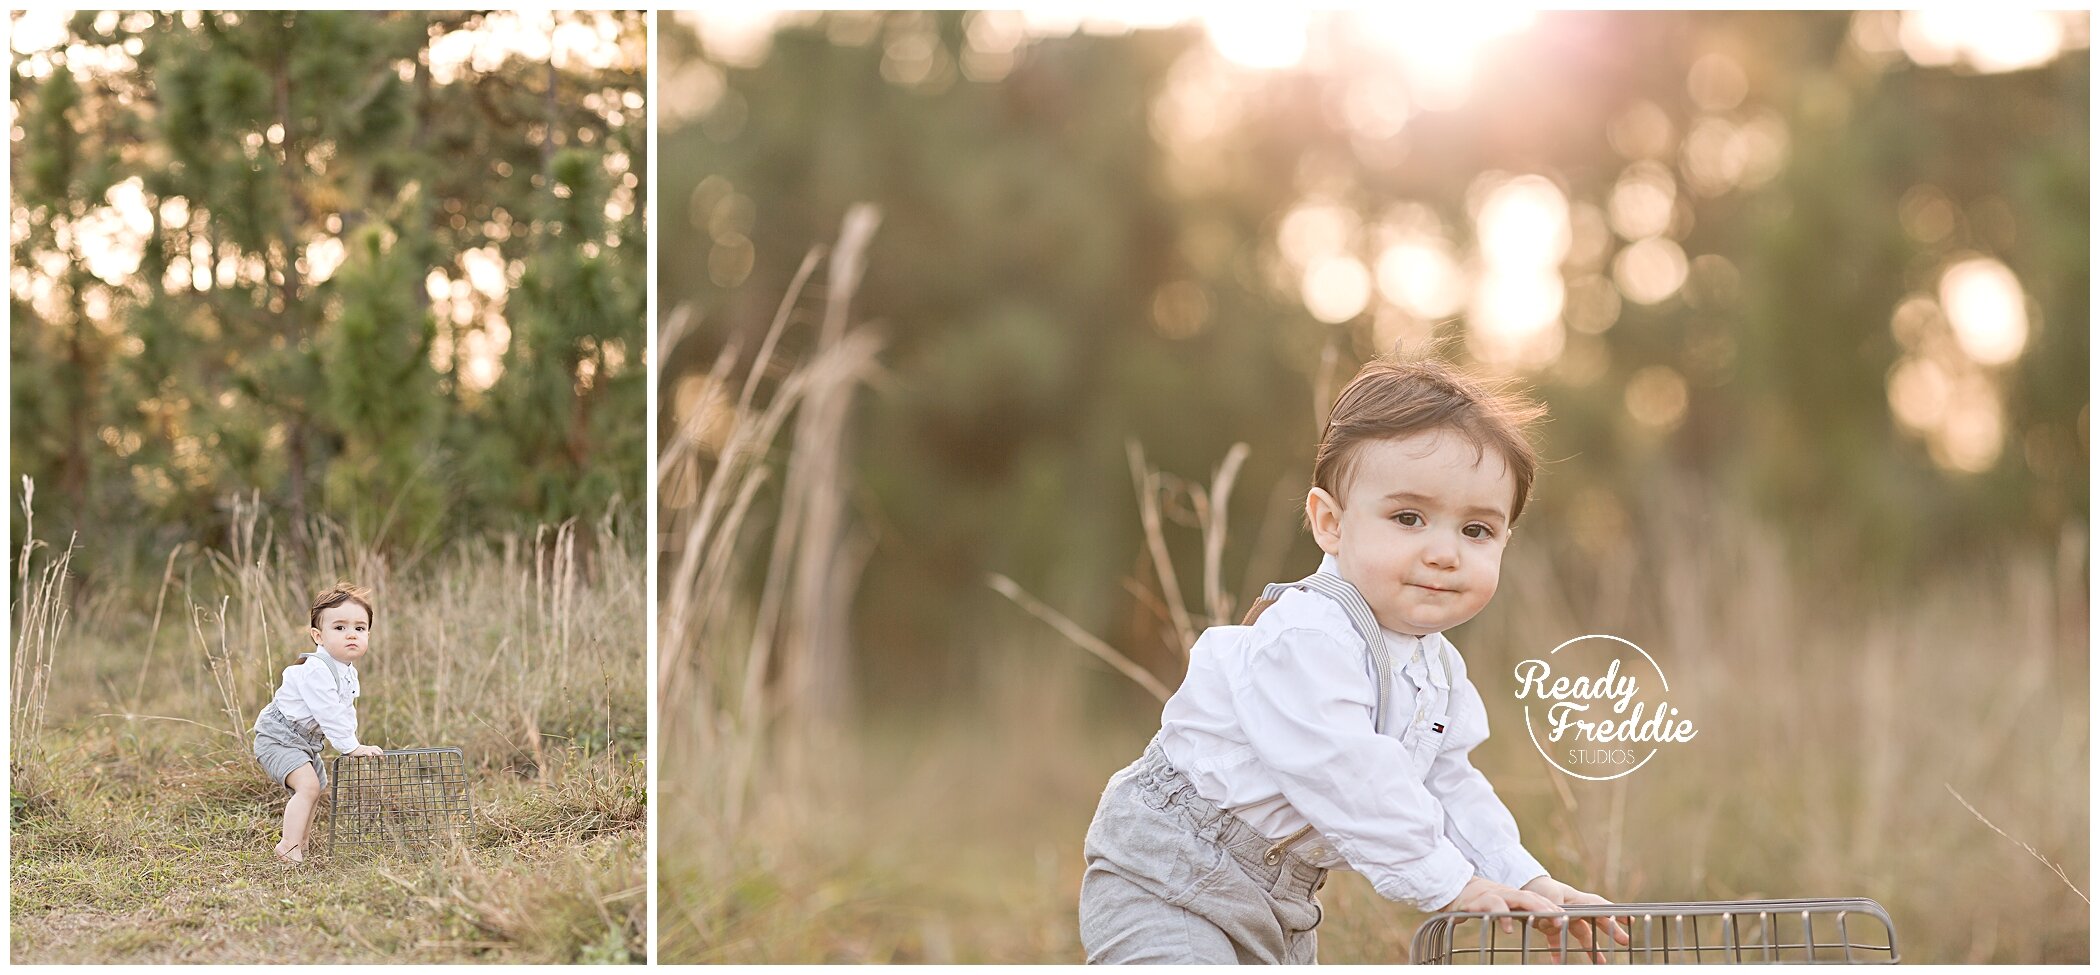 One Year Old Birthday Pictures at the field during sundown | Ready Freddie Studios | Miami, FL